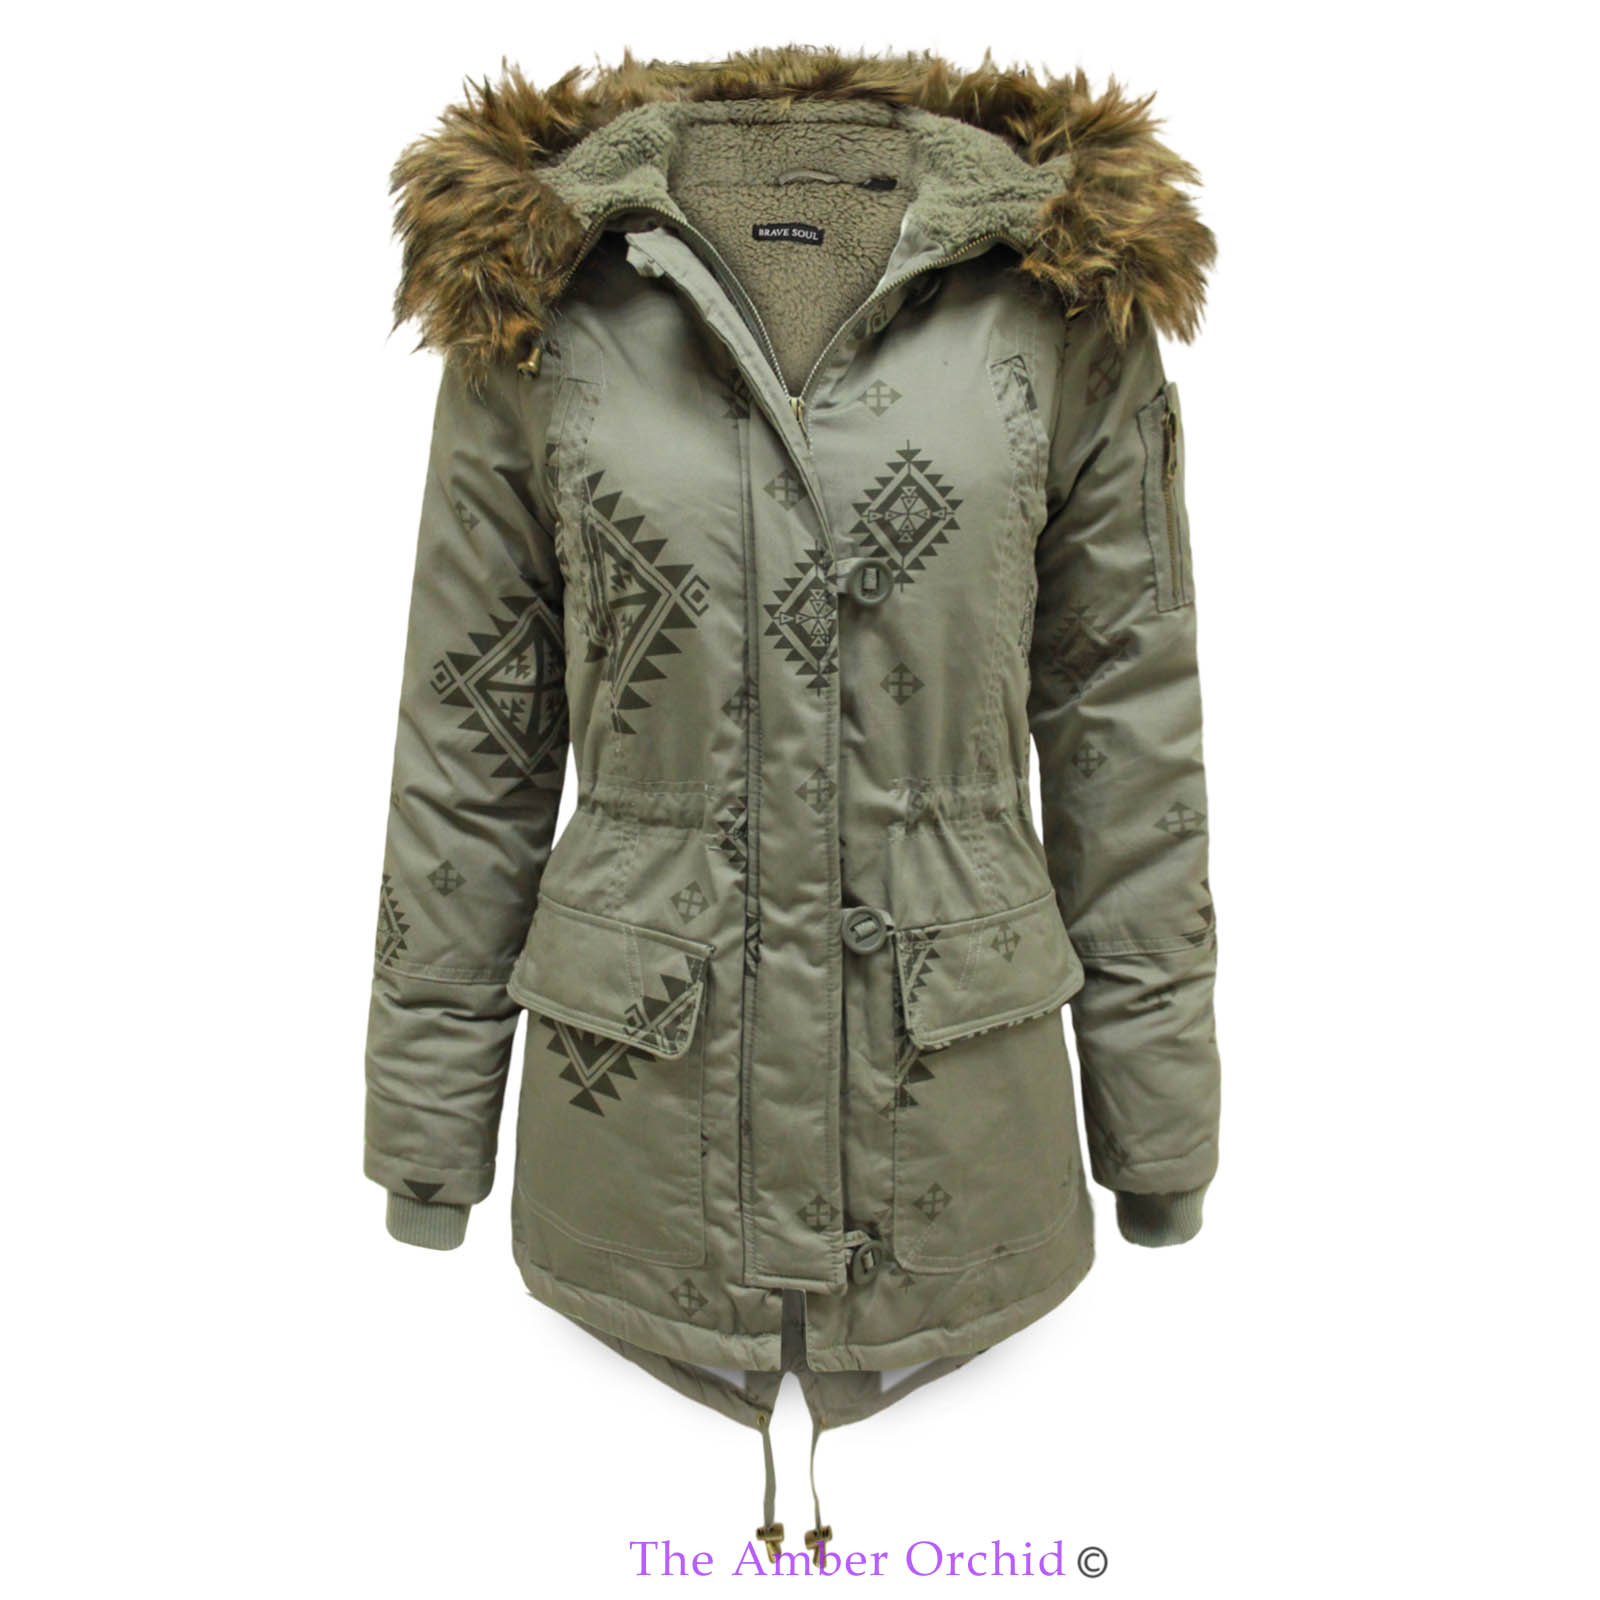 LADIES WOMENS AZTEC PRINT FUR HOODED LINED MILITARY FISHTAIL PARKA ...